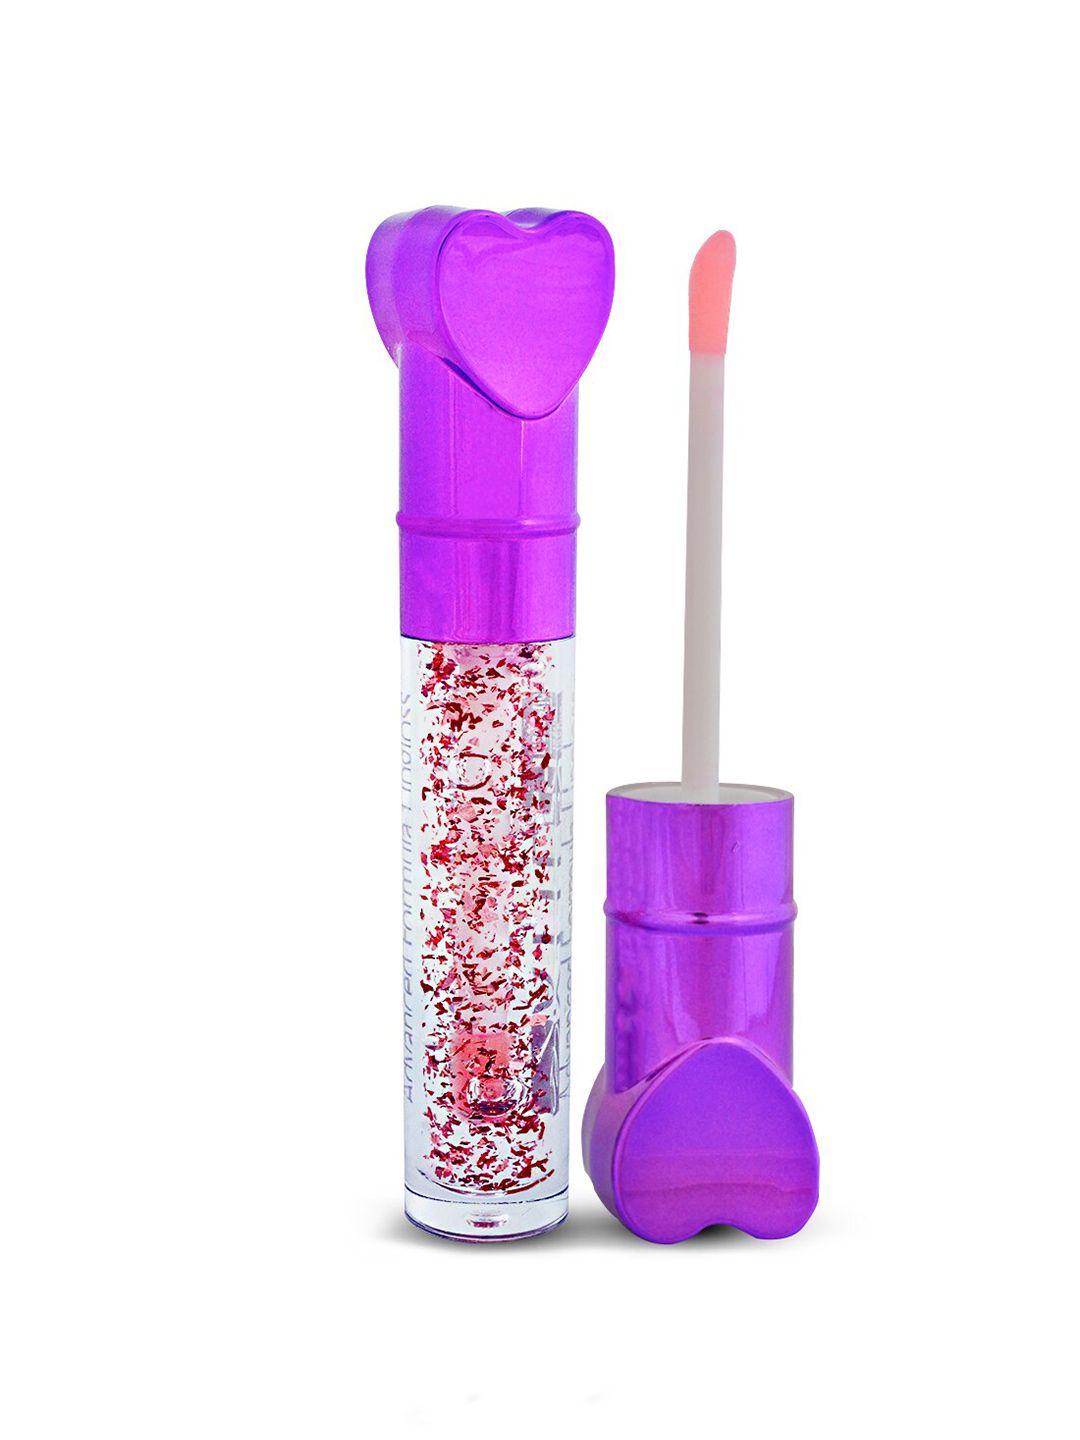 adbeni glittery color changing lip gloss for dry & chapped lips - 10ml - purple heart